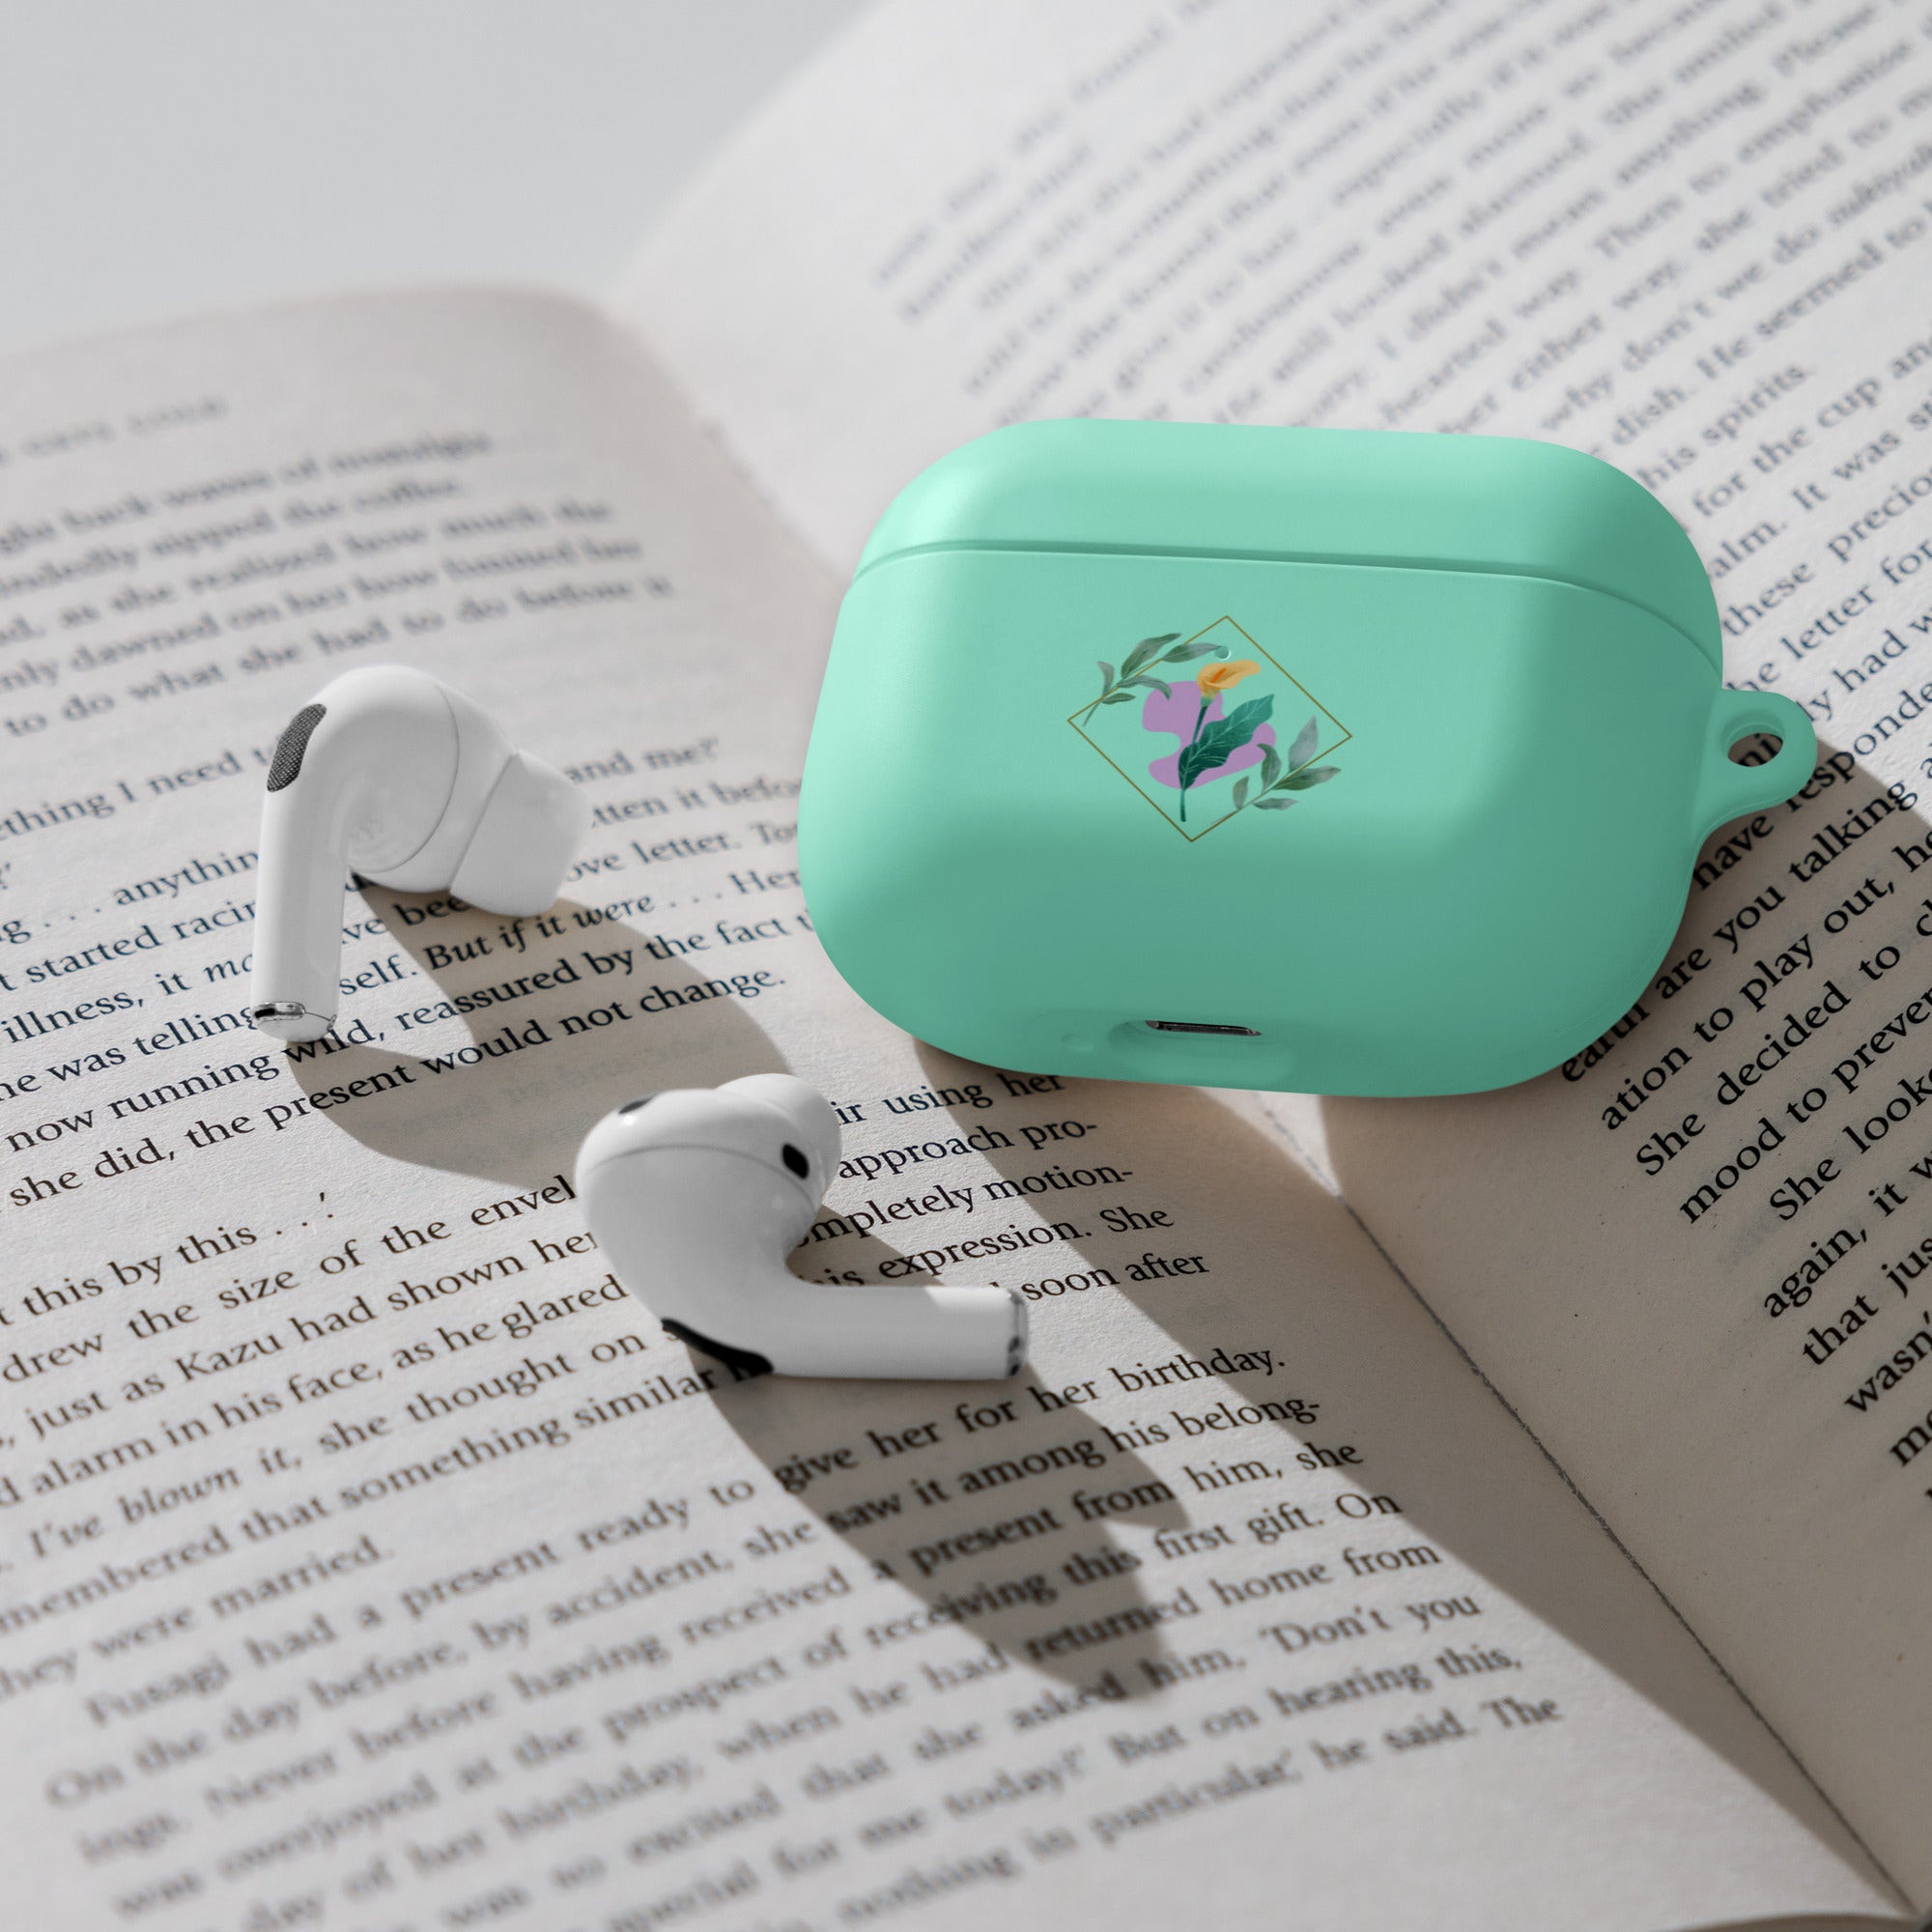 N Bag Silicone Apple Airpods Case Cover for Pro1 Generation